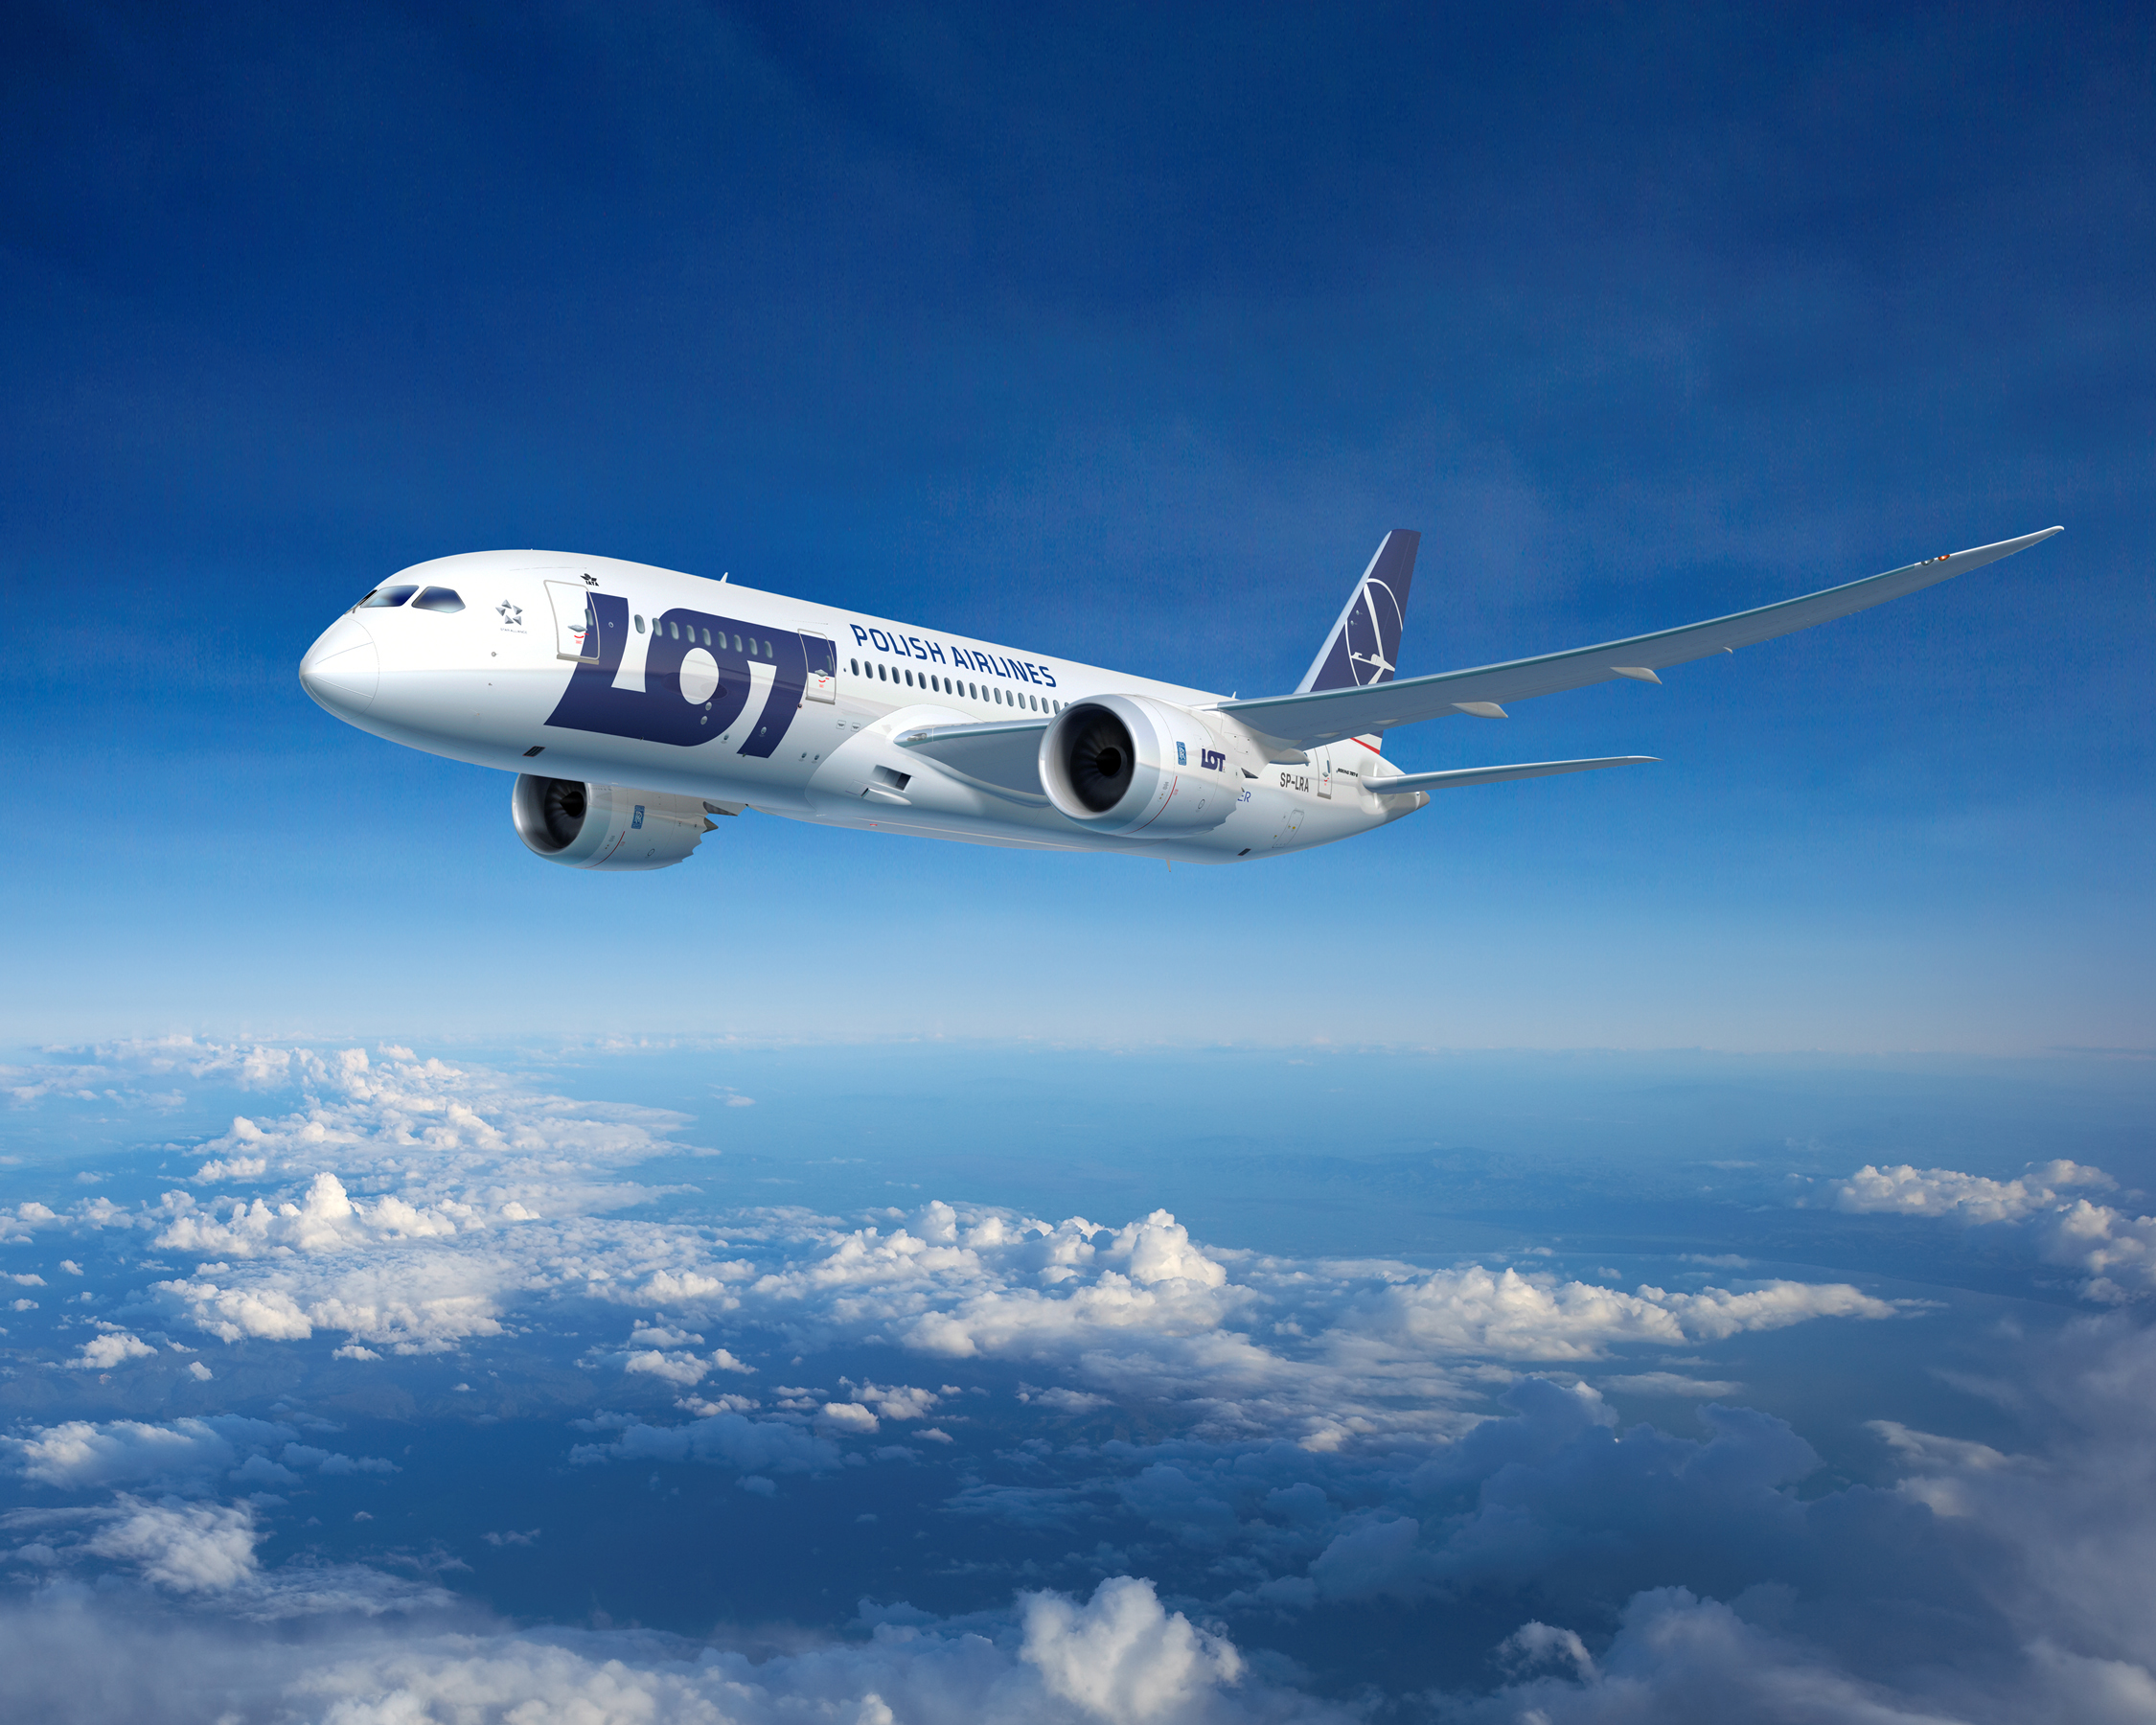 LOT Polish Airlines to connect Warsaw and Delhi in September 2019